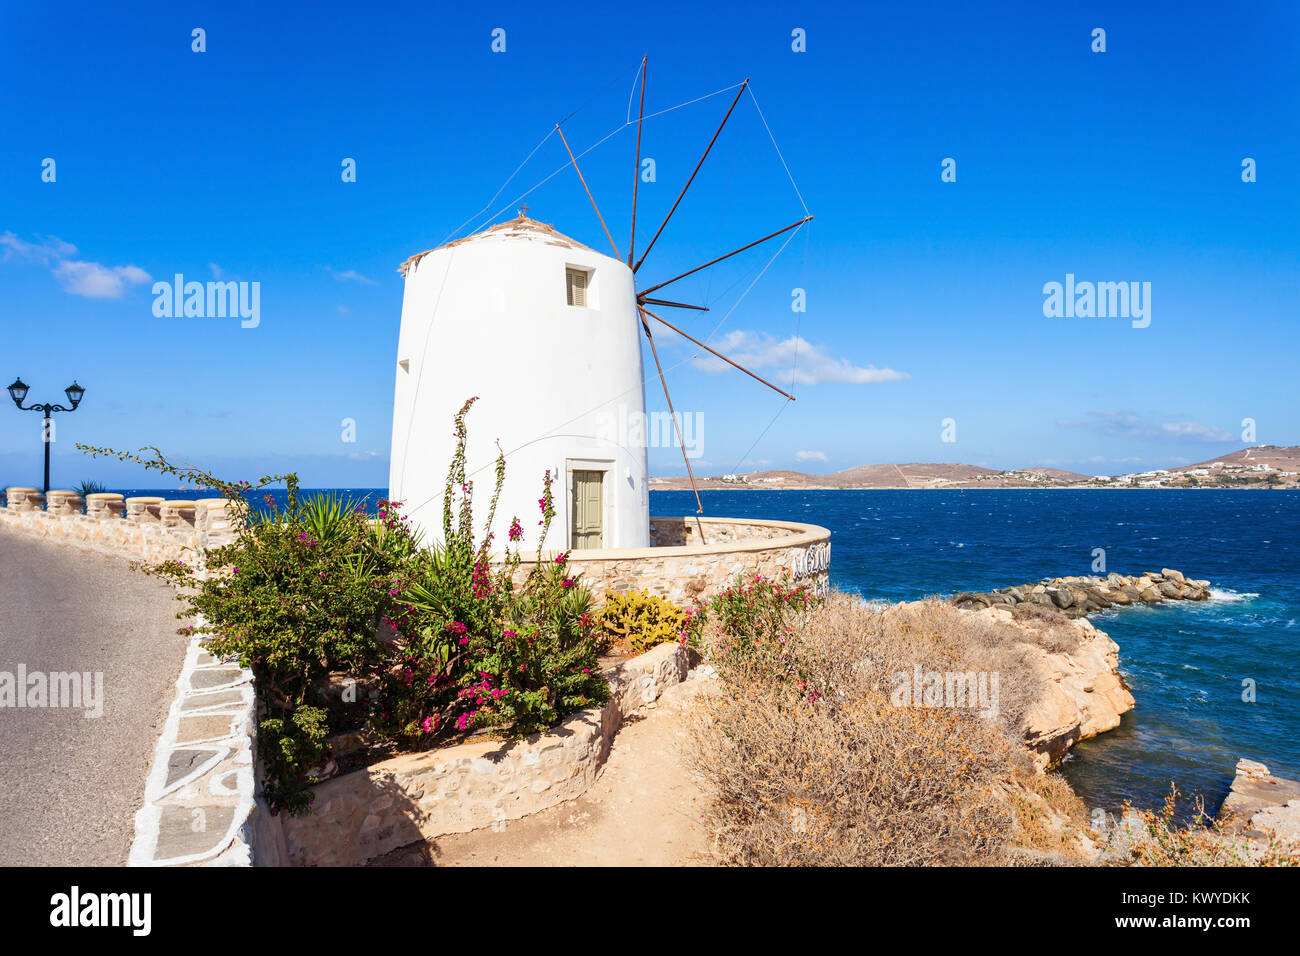 Traditional cycladic windmill in Parikia town, on the island of Paros in Greece Stock Photo